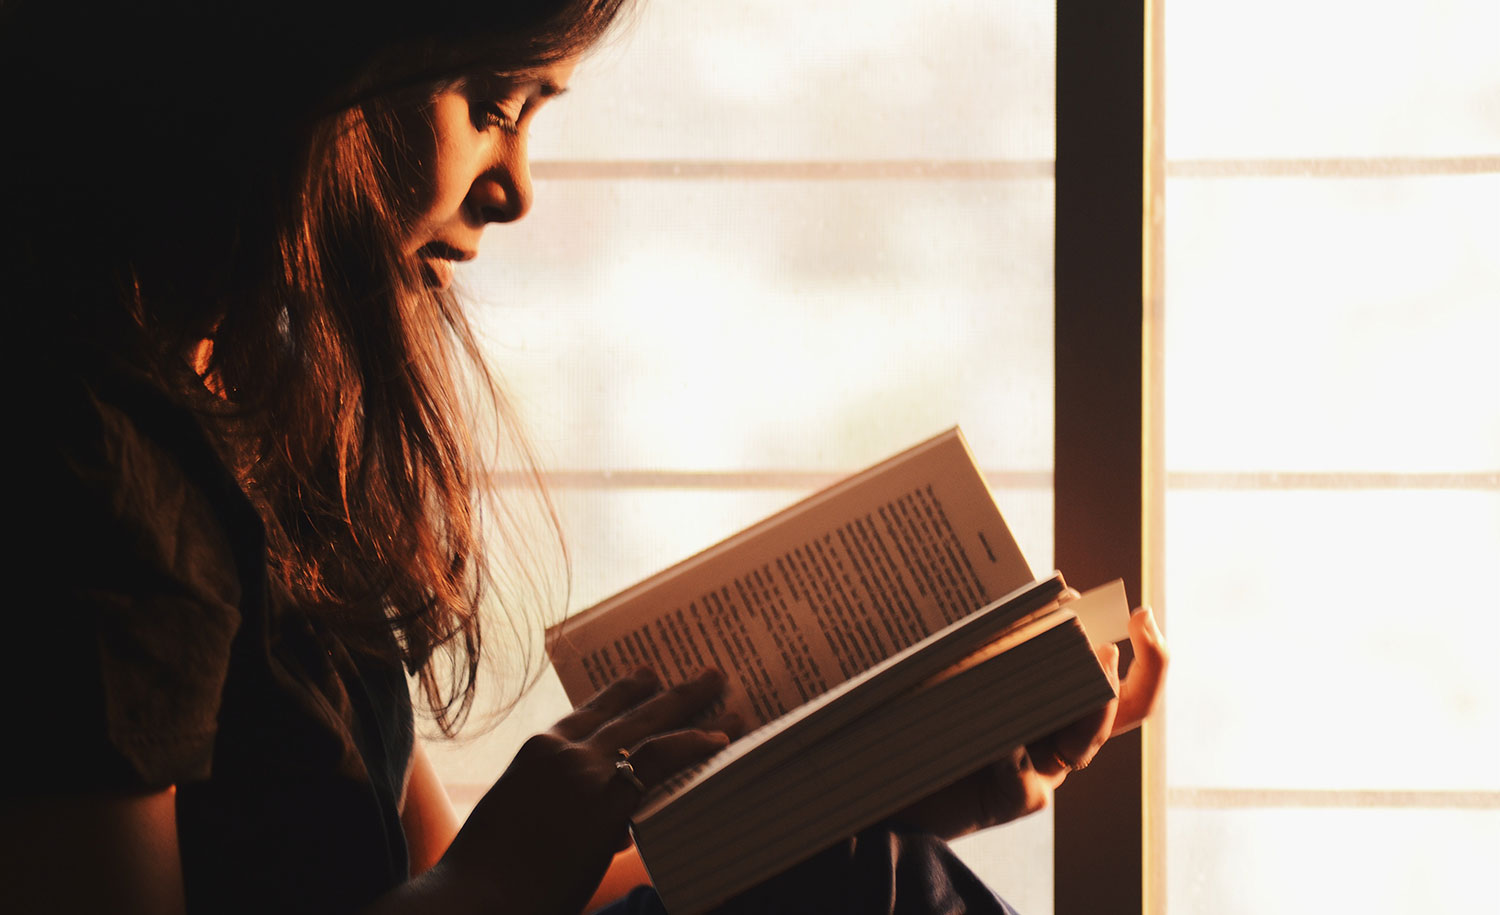 A highly sensitive person reads a book by the window.